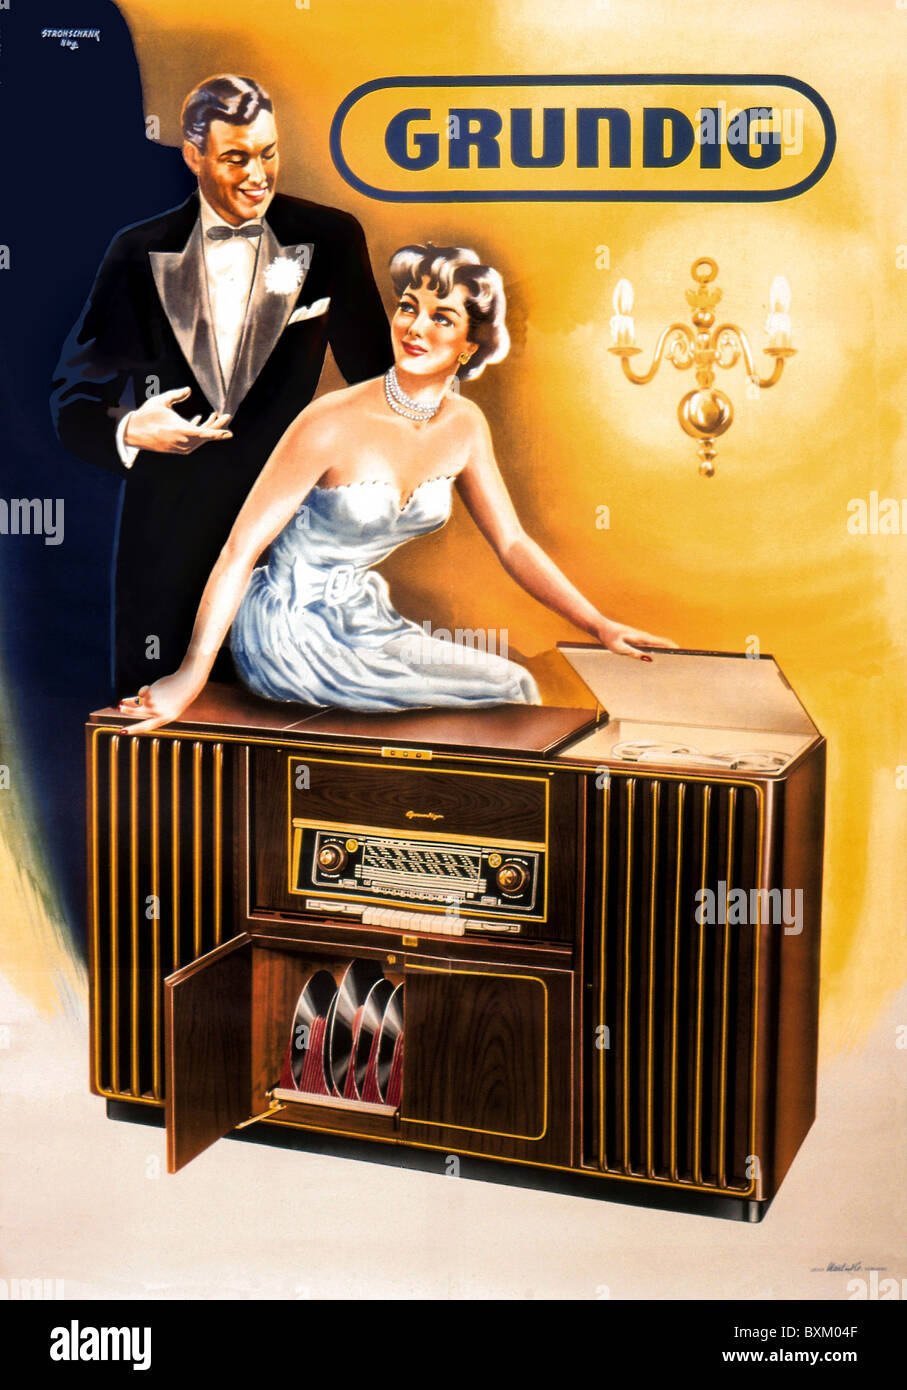 broadcast, radio, radio set Grundig Konzertschrank 8040 W with record player and tape recorder, advertising poster, Germany, 1953, Additional-Rights-Clearences-Not Available Stock Photo